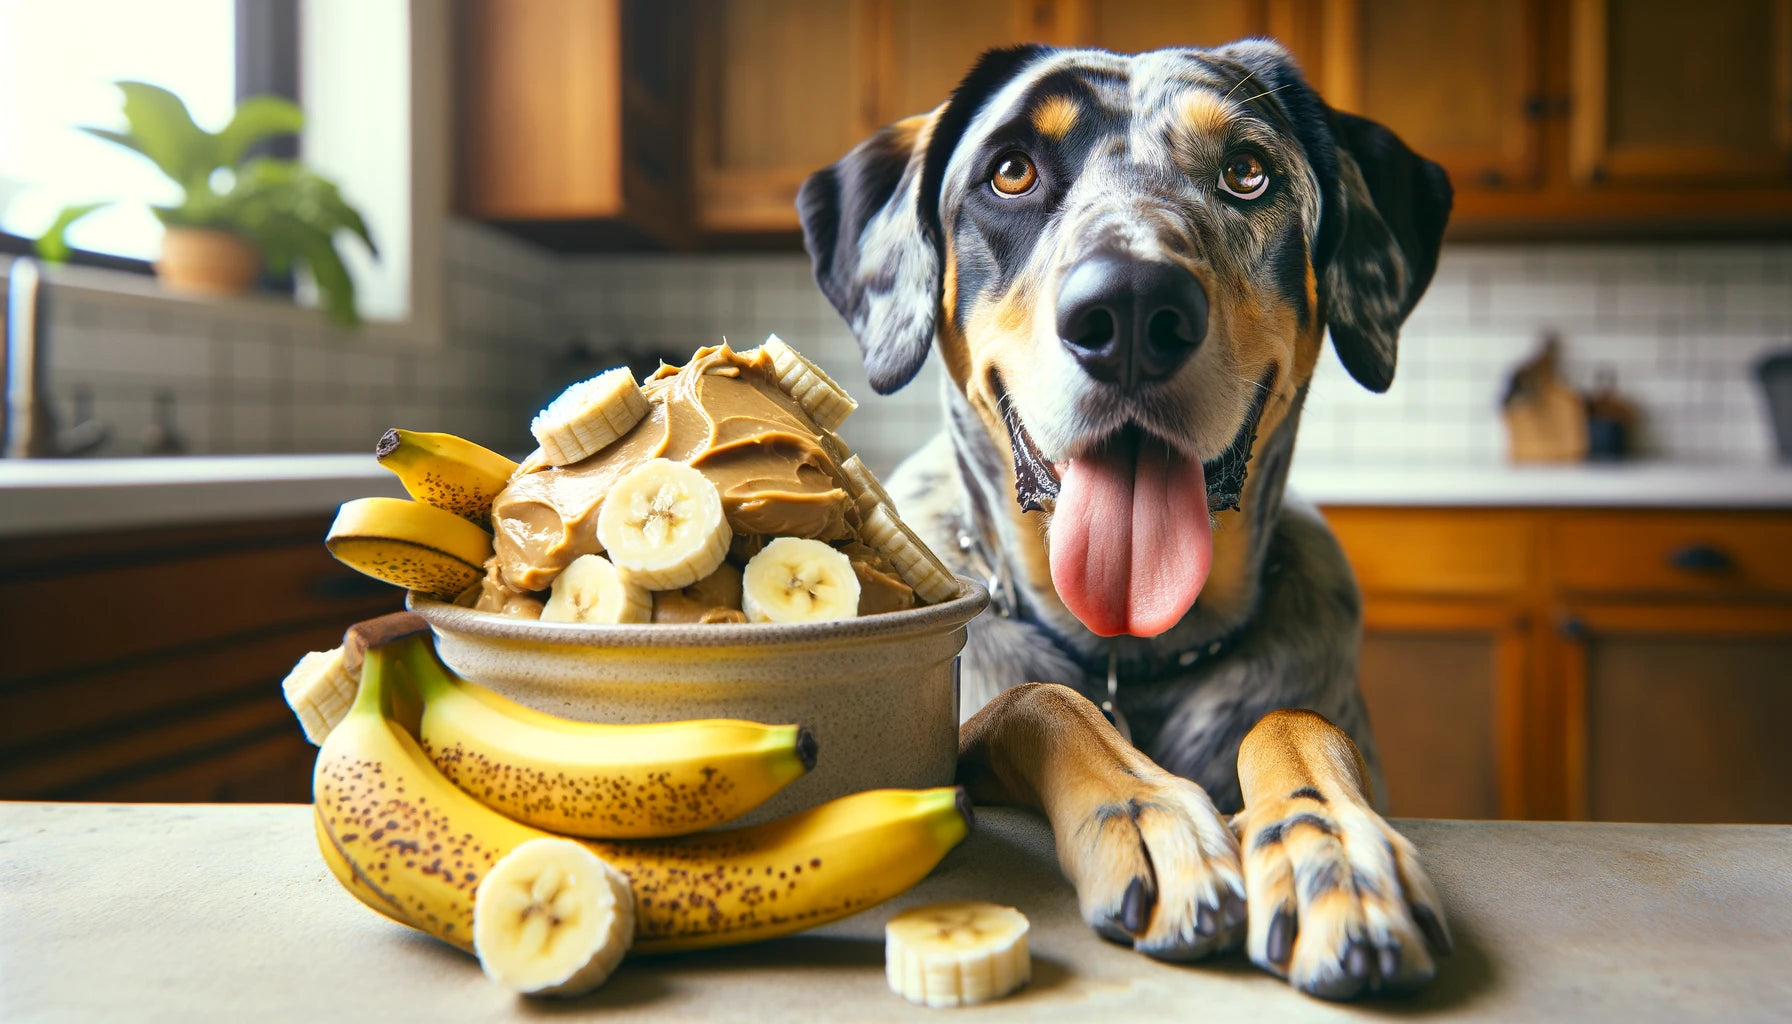 Peanut Butter Banana Dog Treats with a Catahoula Leopard Dog sitting next to it.